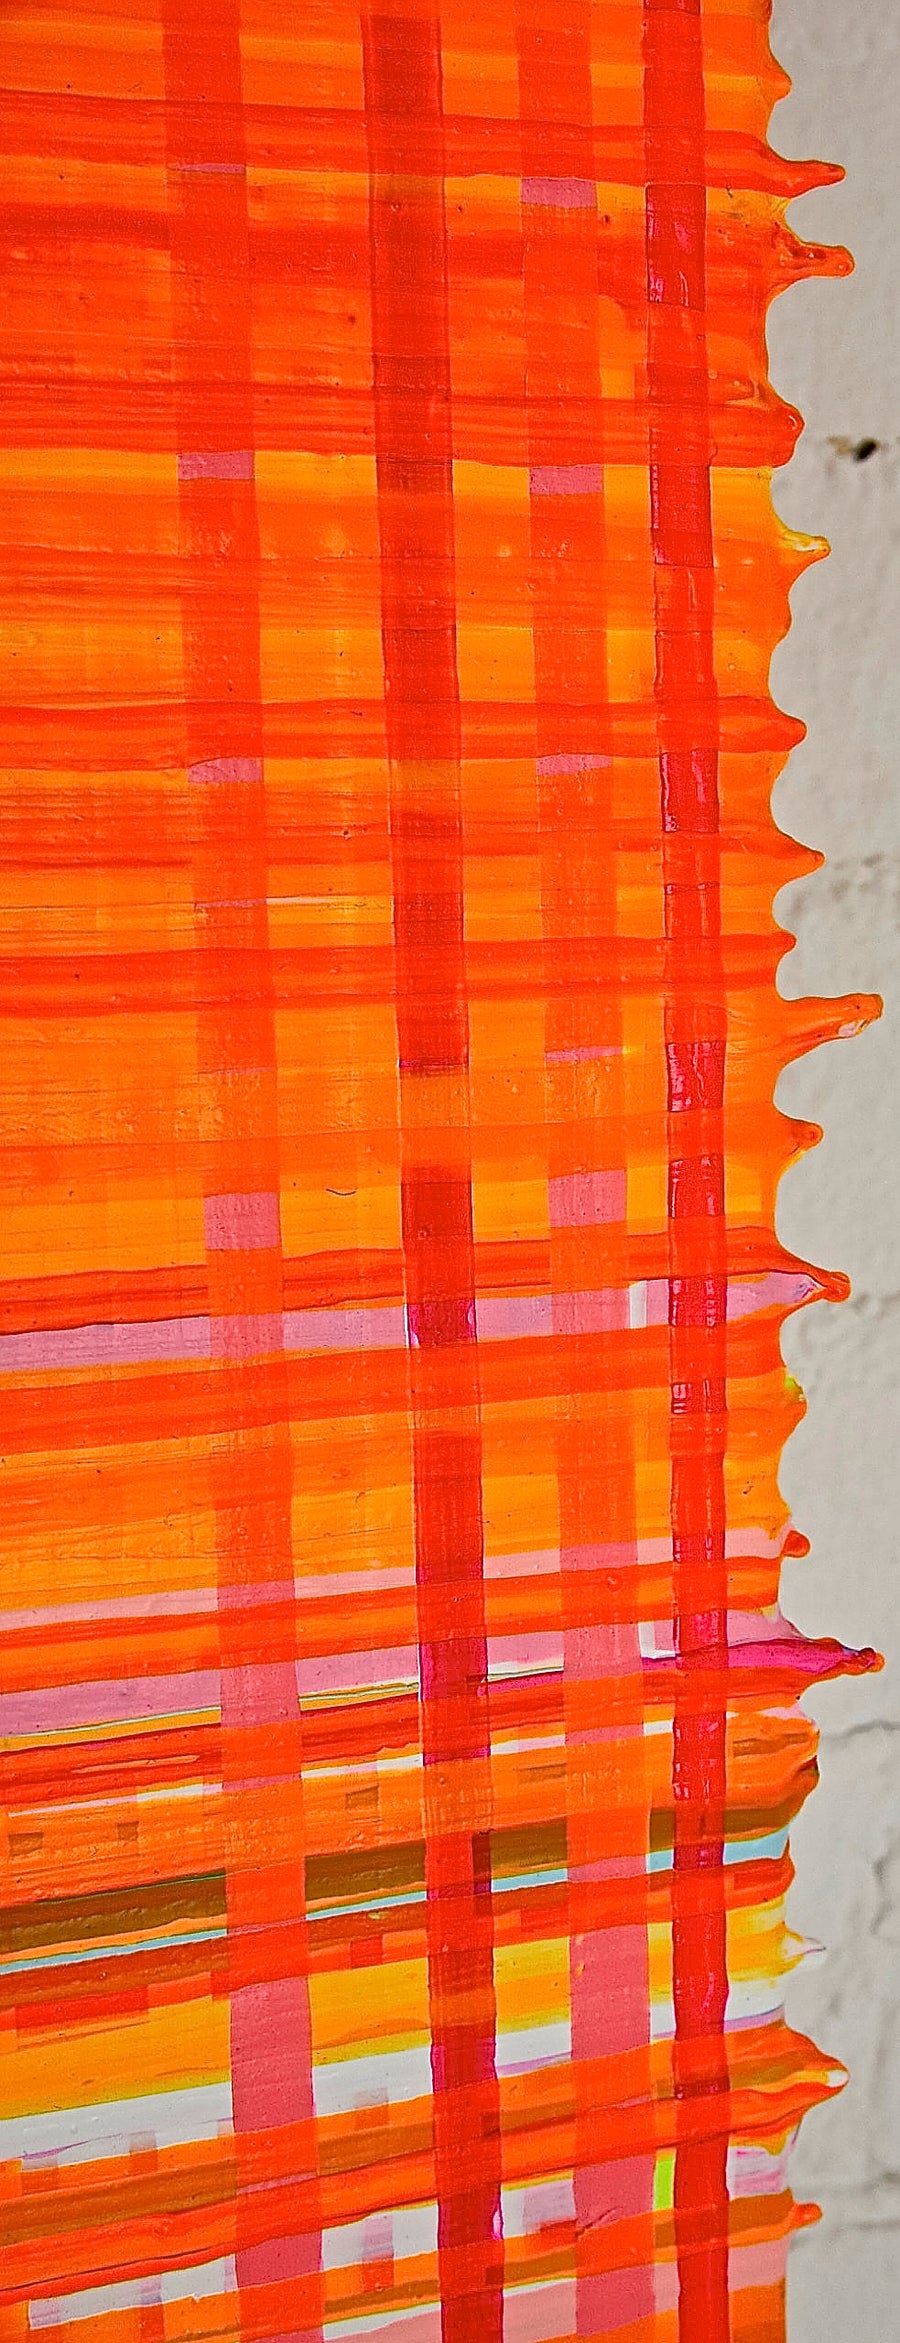 Close up detail shot of orange and yellow abstract drip painting by New York Artist Jon James. Represented by art gallery Tuleste Factory in Chelsea, NYC.